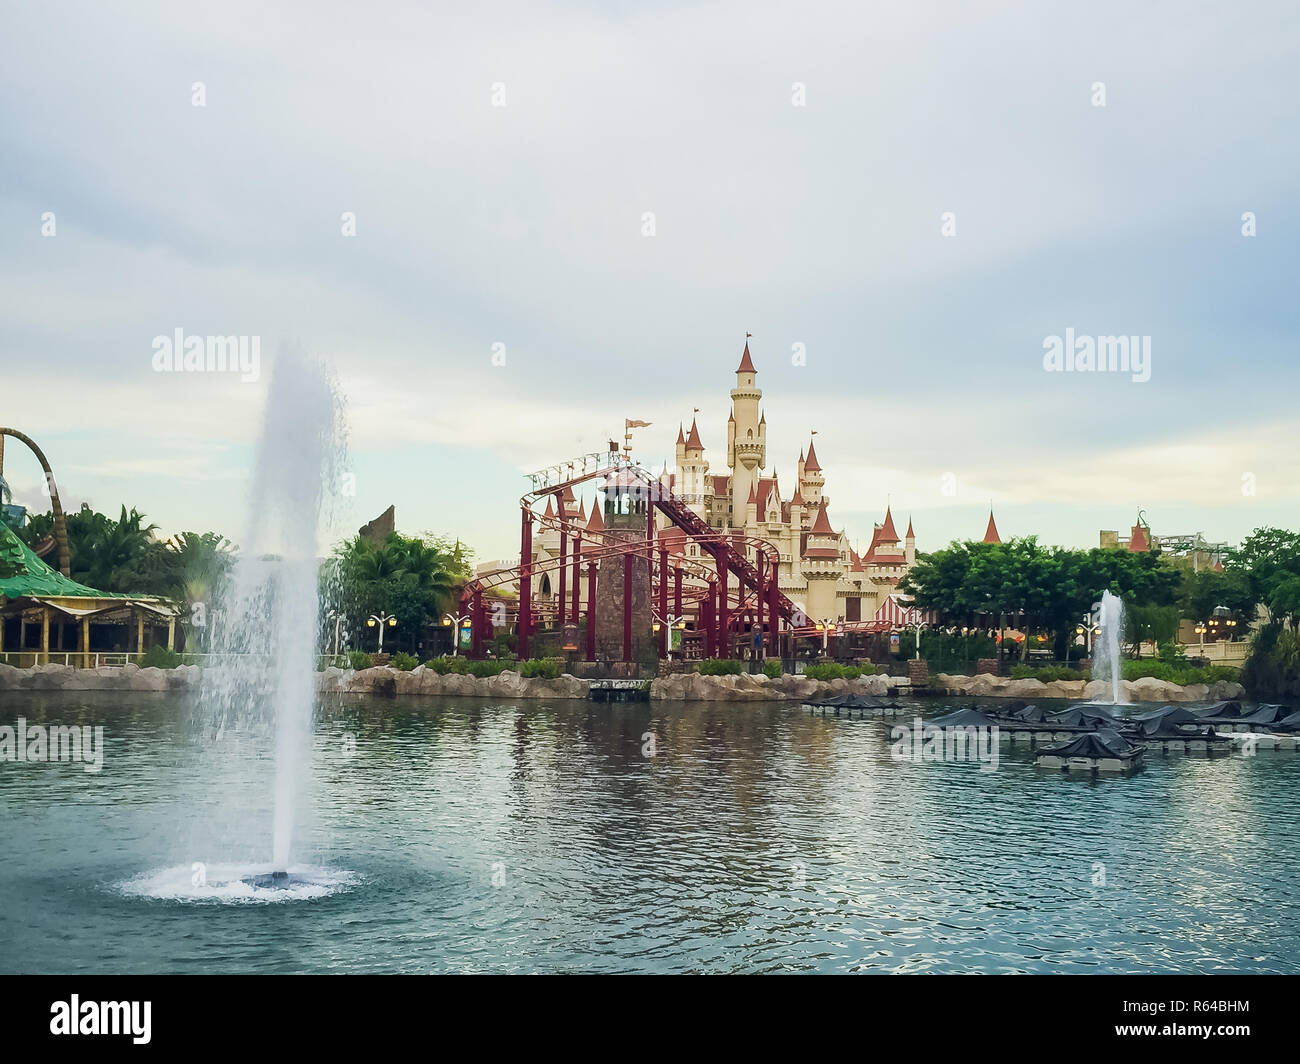 SINGAPORE - APRIL 11: Beautiful castle and roller coaster in Universal Studios on April 18, 2017. Universal Studios Singapore is theme park located within Resorts World Sentosa, Singapore. Stock Photo